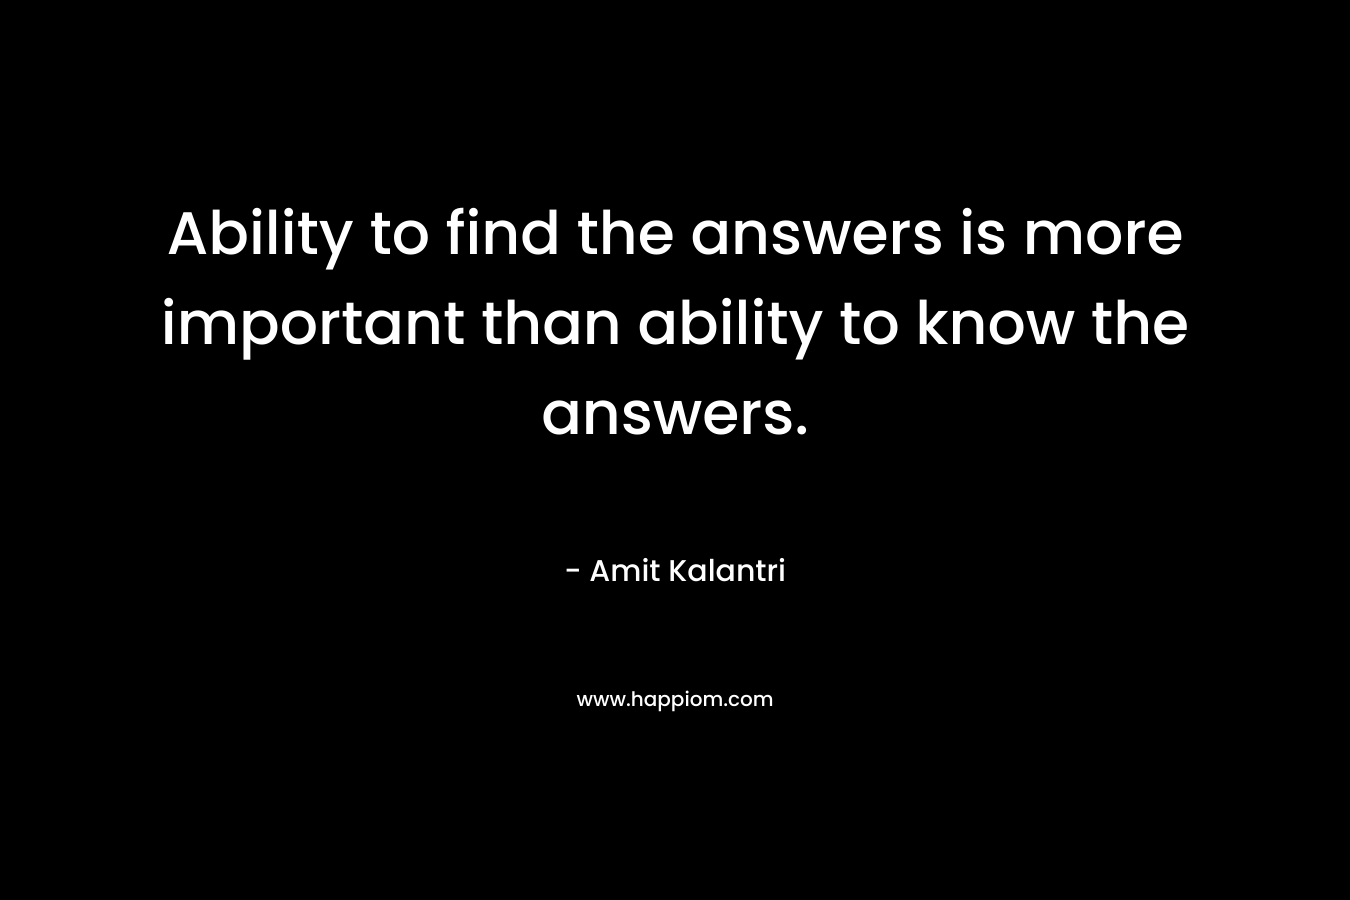 Ability to find the answers is more important than ability to know the answers. – Amit Kalantri